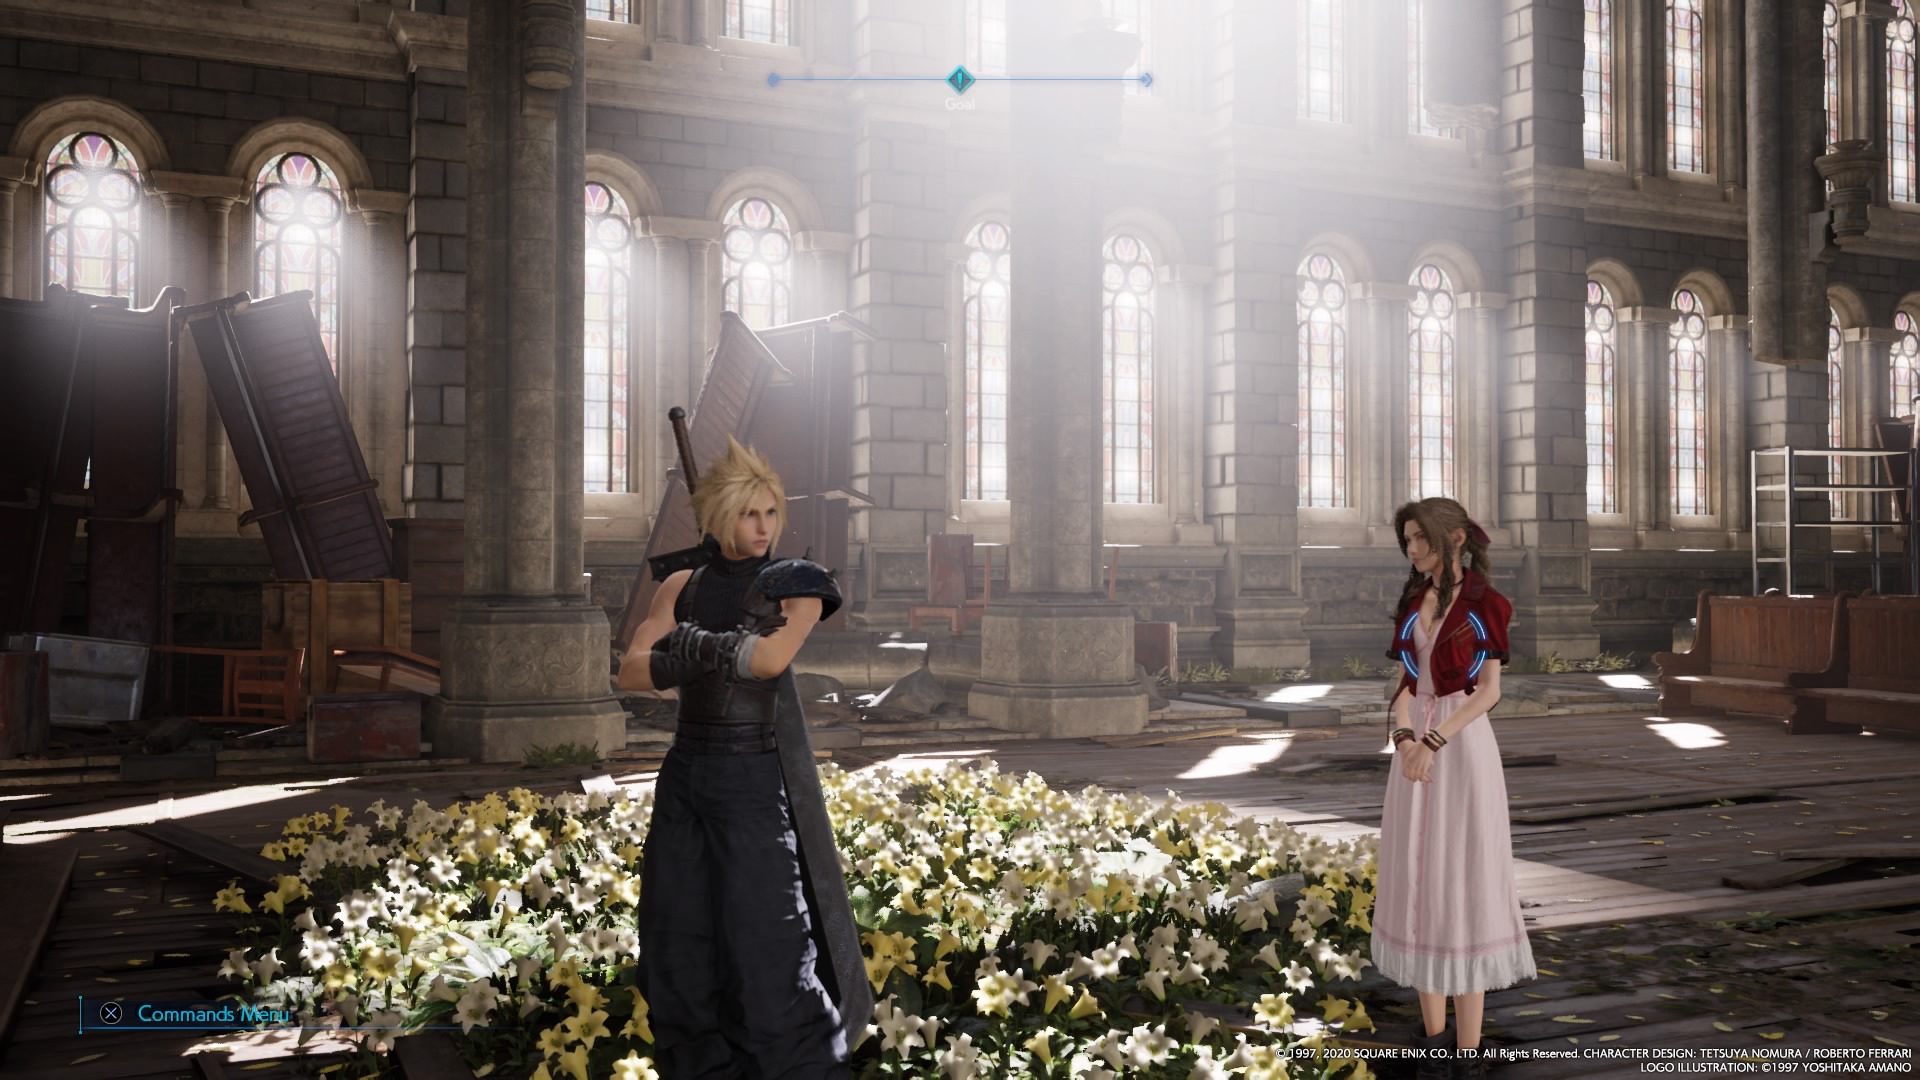 Final Fantasy VII Remake: Nostalgia in its Finest Form - PS4 Review